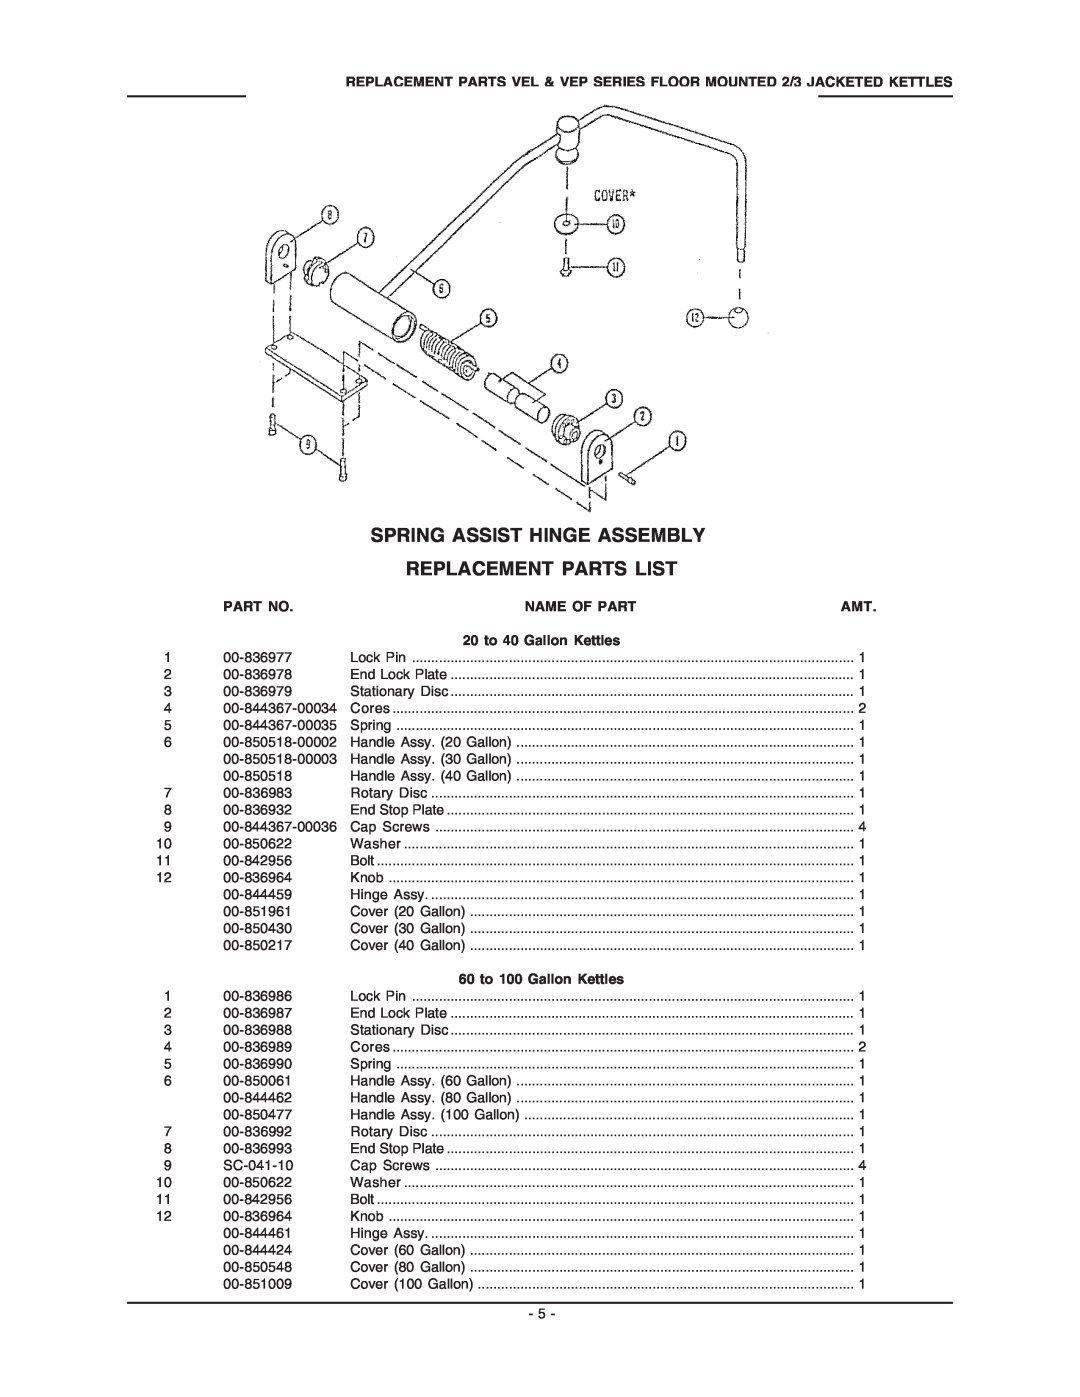 Vulcan-Hart VEP100, VEP40, VEP30, VEP80, VEL60, VEL40, VEL30 Spring Assist Hinge Assembly, Replacement Parts List, Name Of Part 